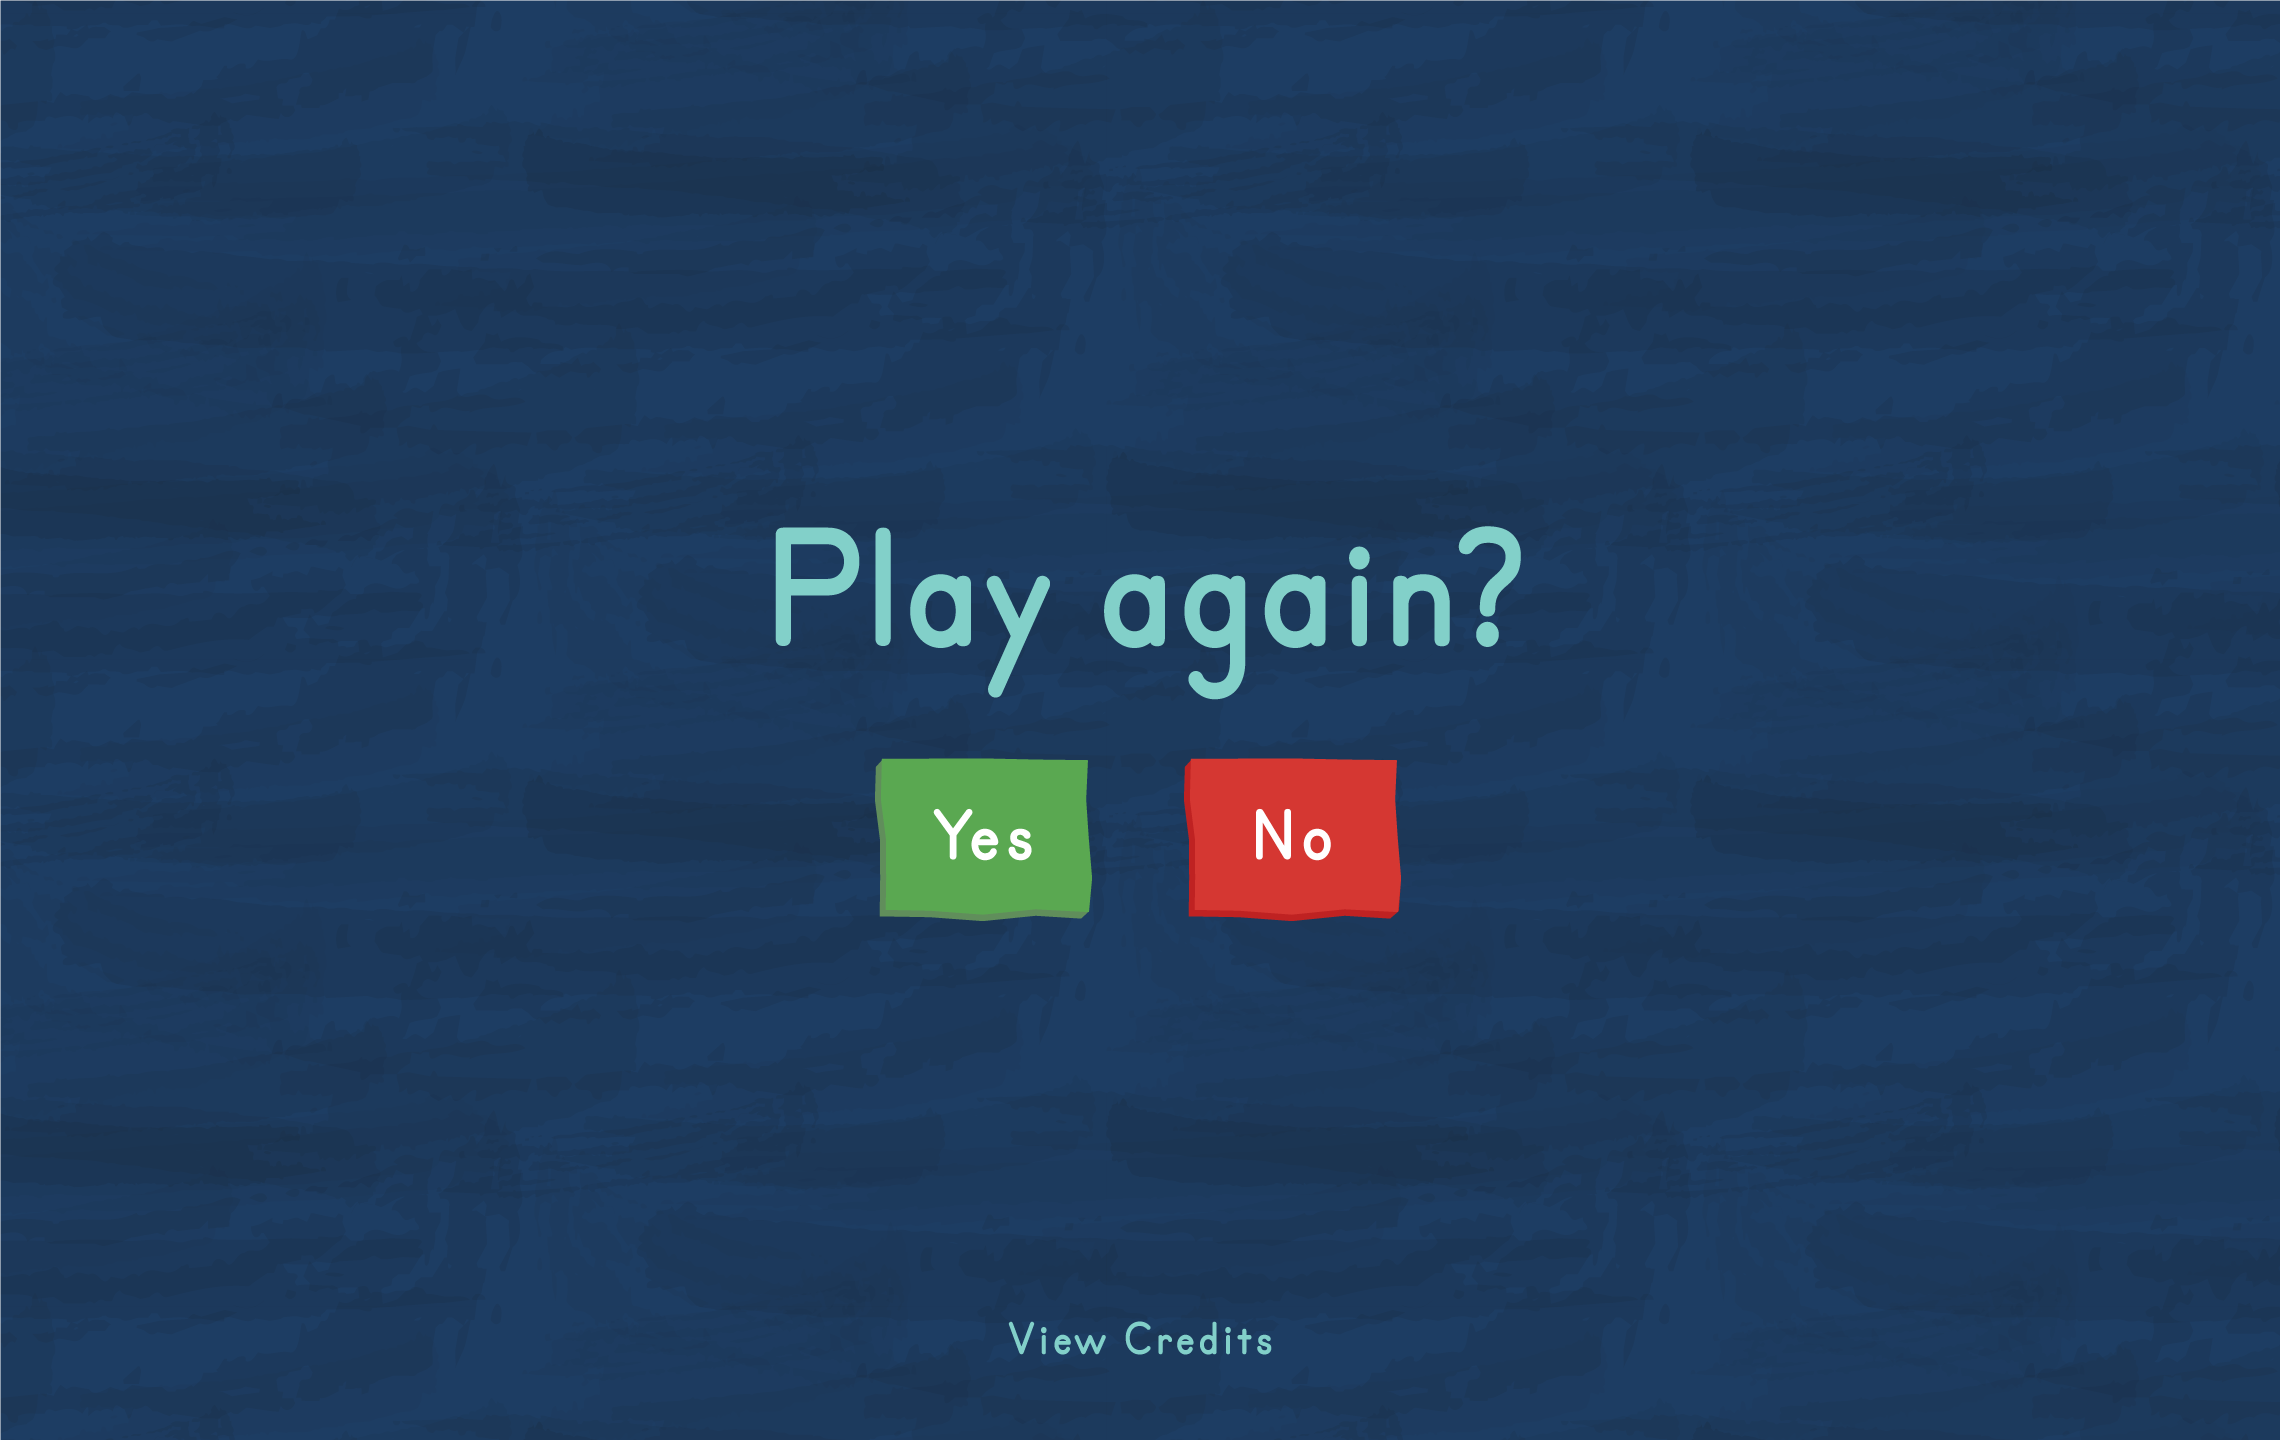 Connect4Learning's play again screen with green yes button and red no button